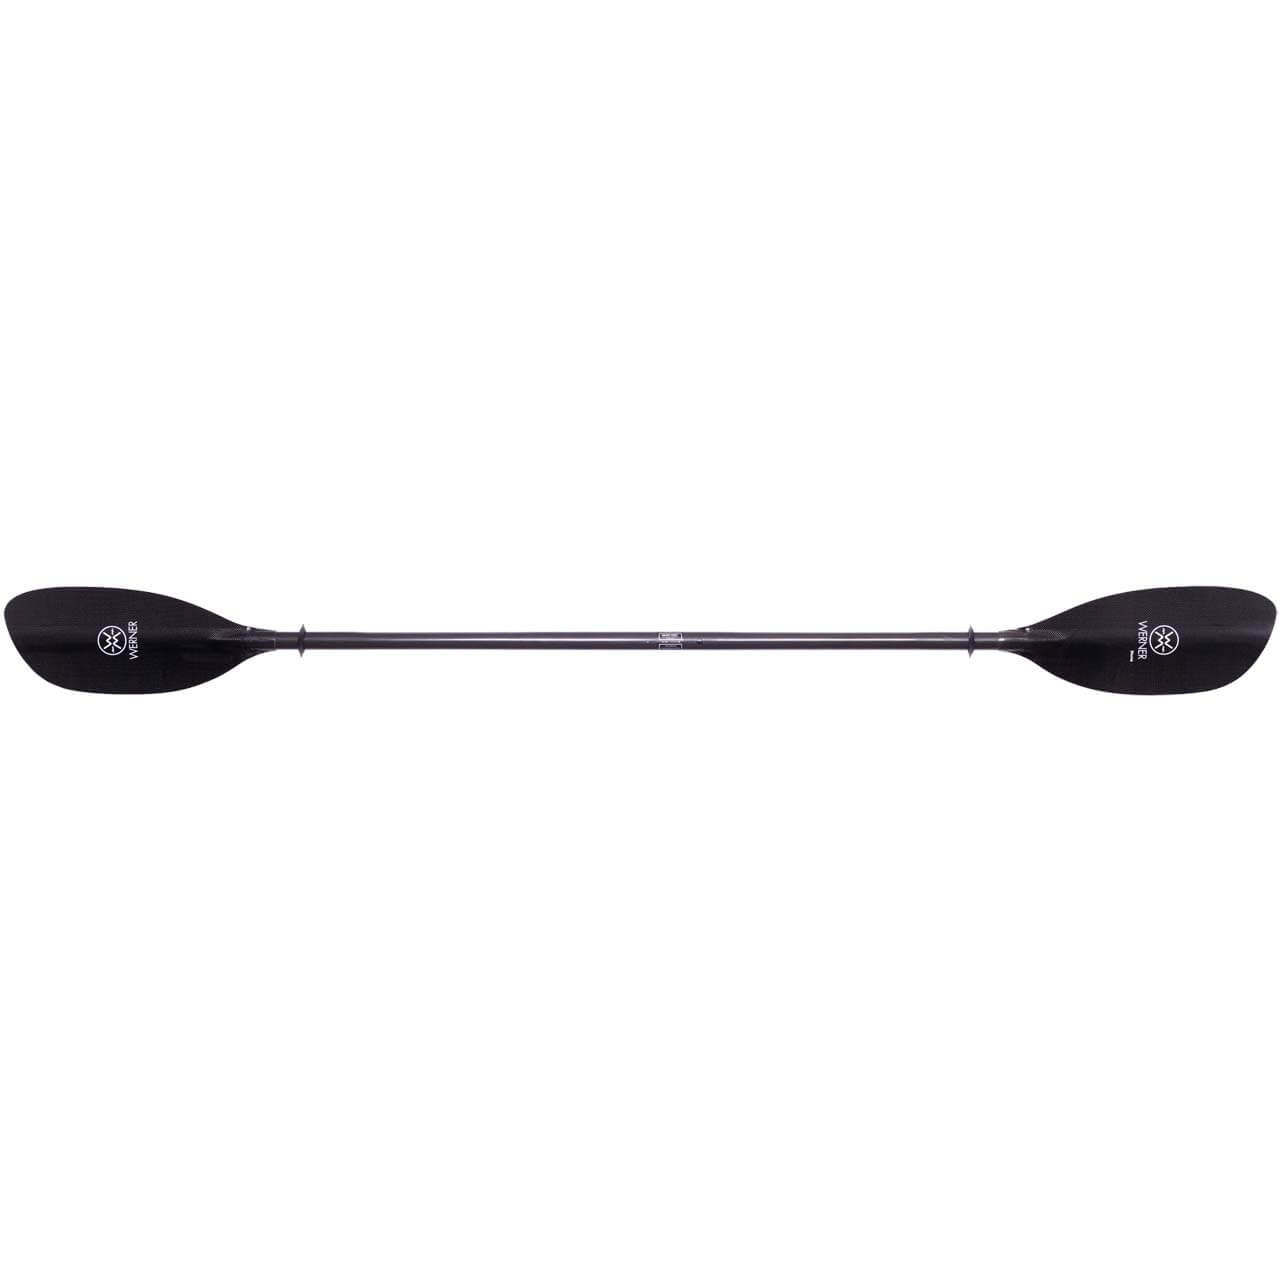 Werner Shuna Carbon - Carbon, 210cm (Small Straight)